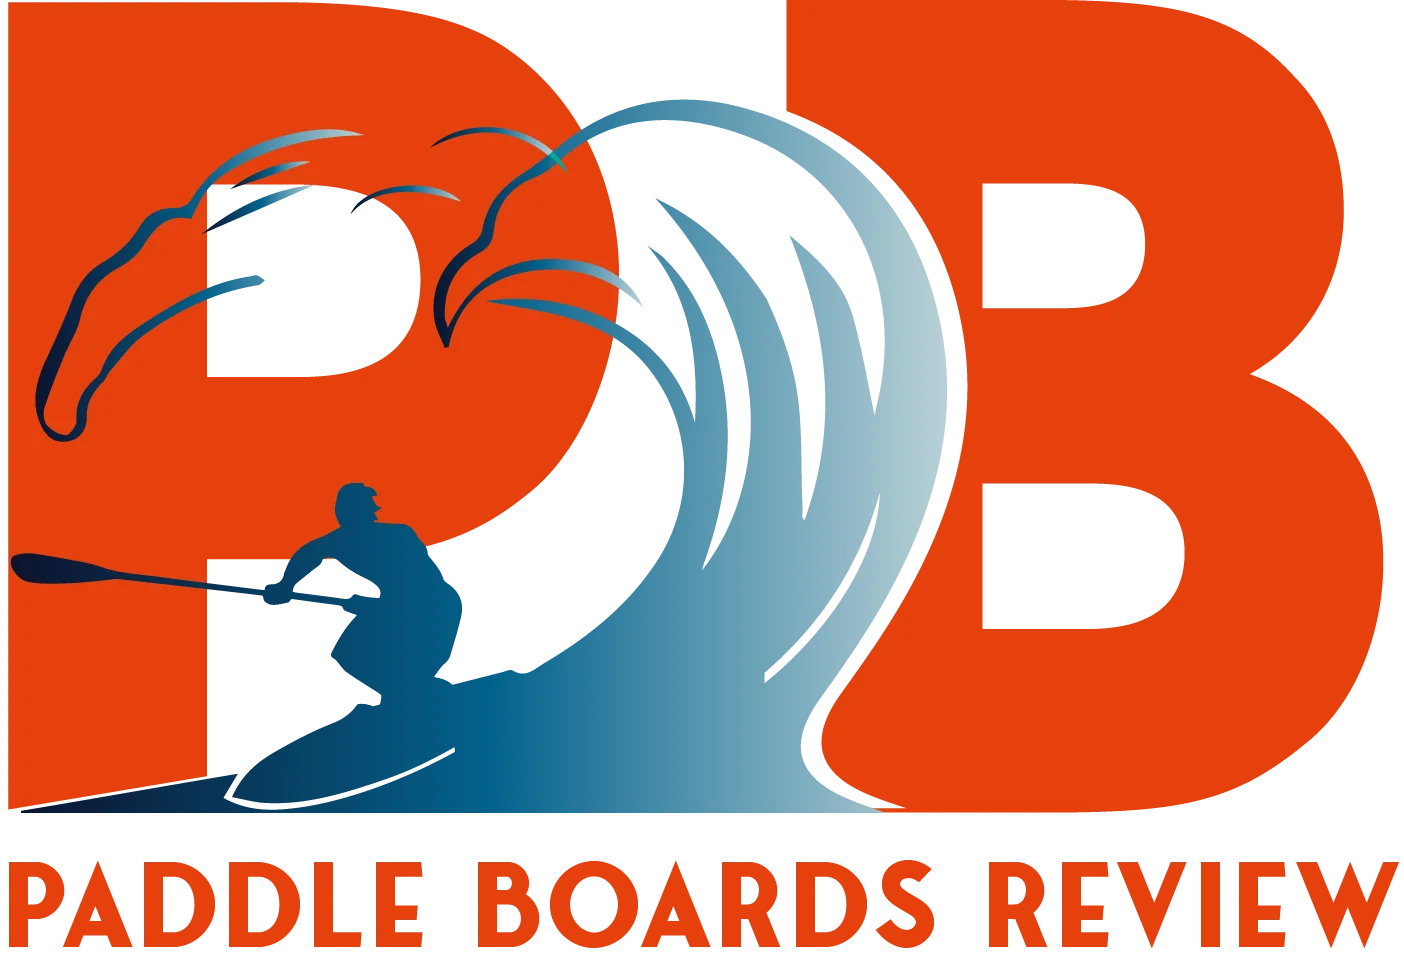 paddle boards review logo